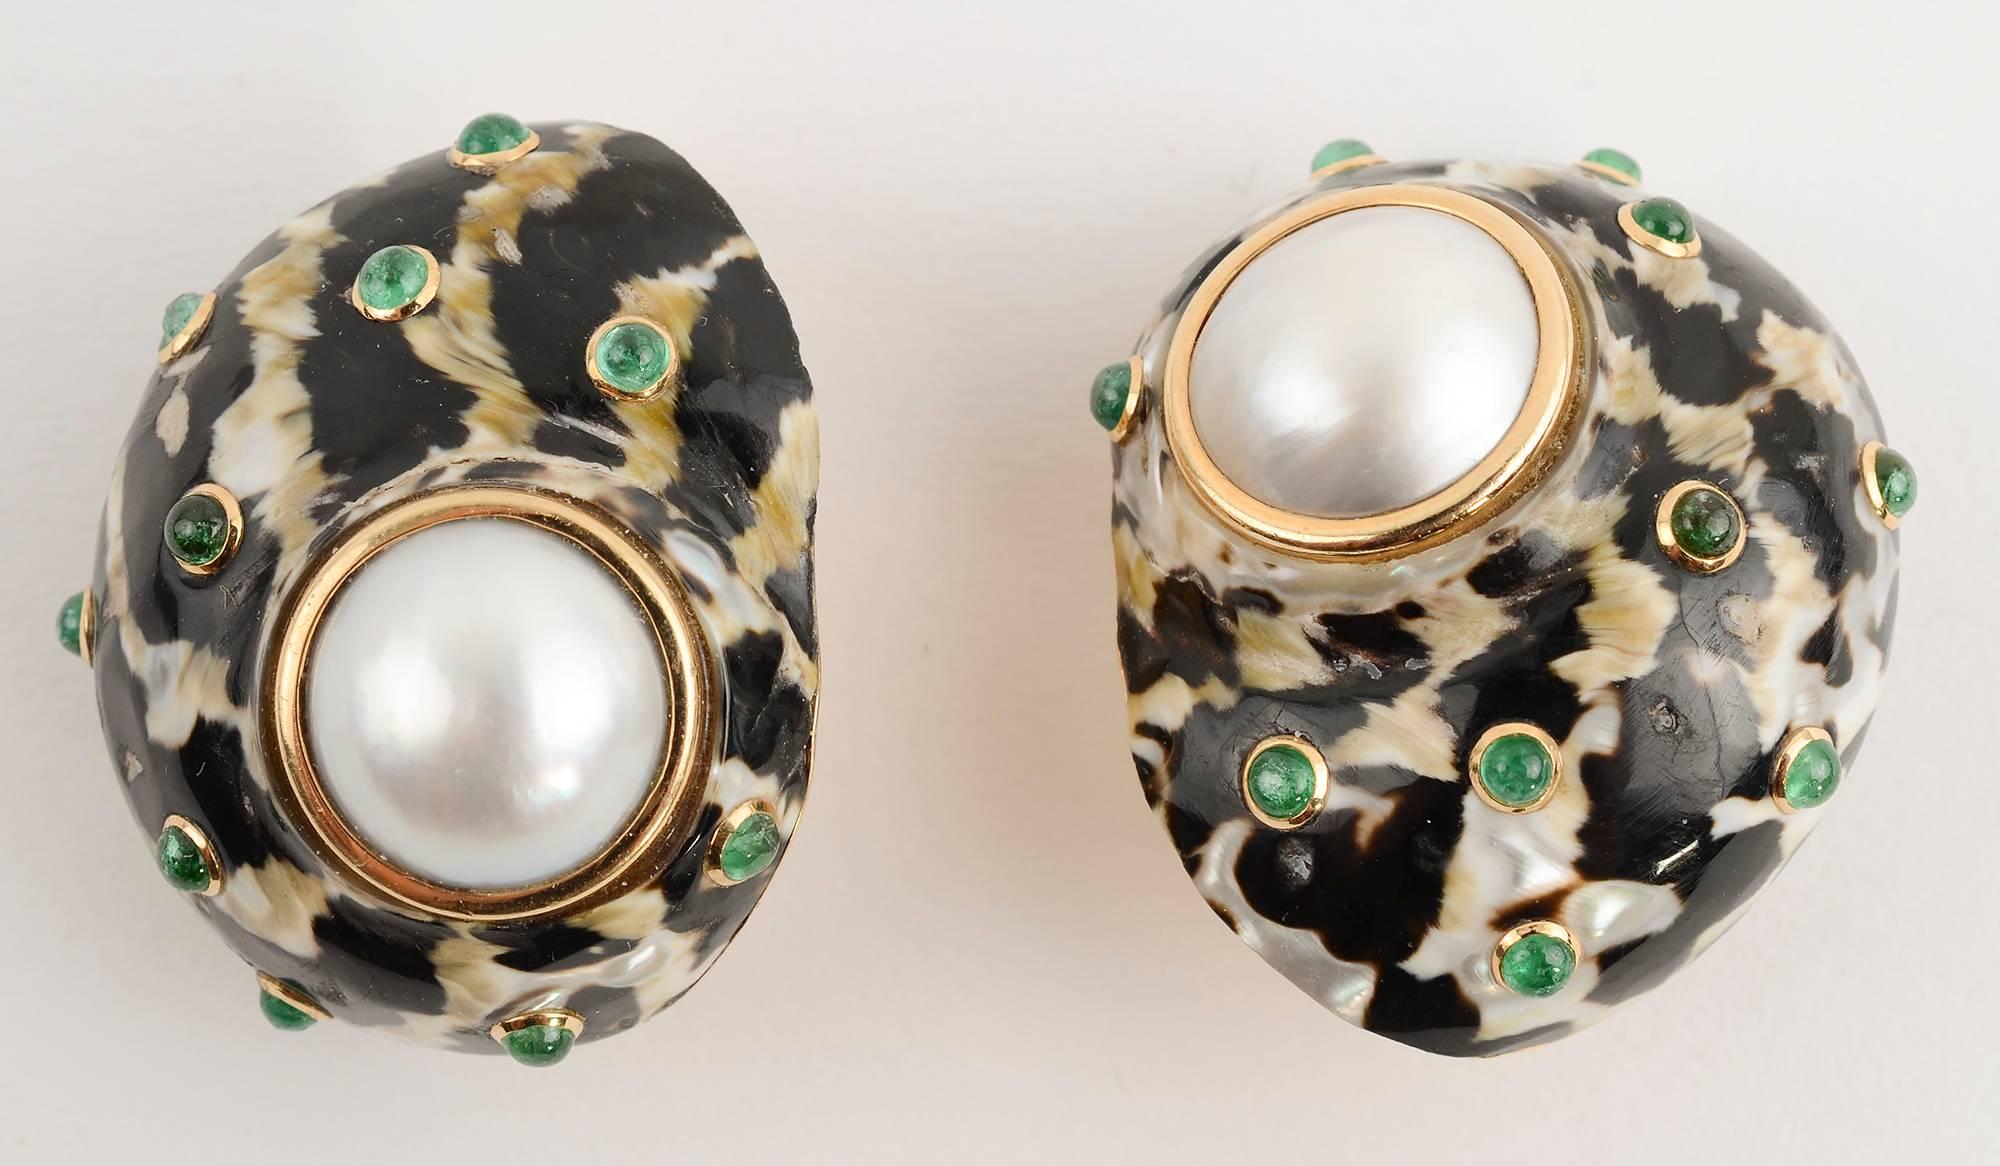 Large, unusual and perfectly stunning earrings by Trianon; circa 1970's. The shells are wonderfully mottled black and white, each with an inset mabe pearl measuring approximately 9/16 